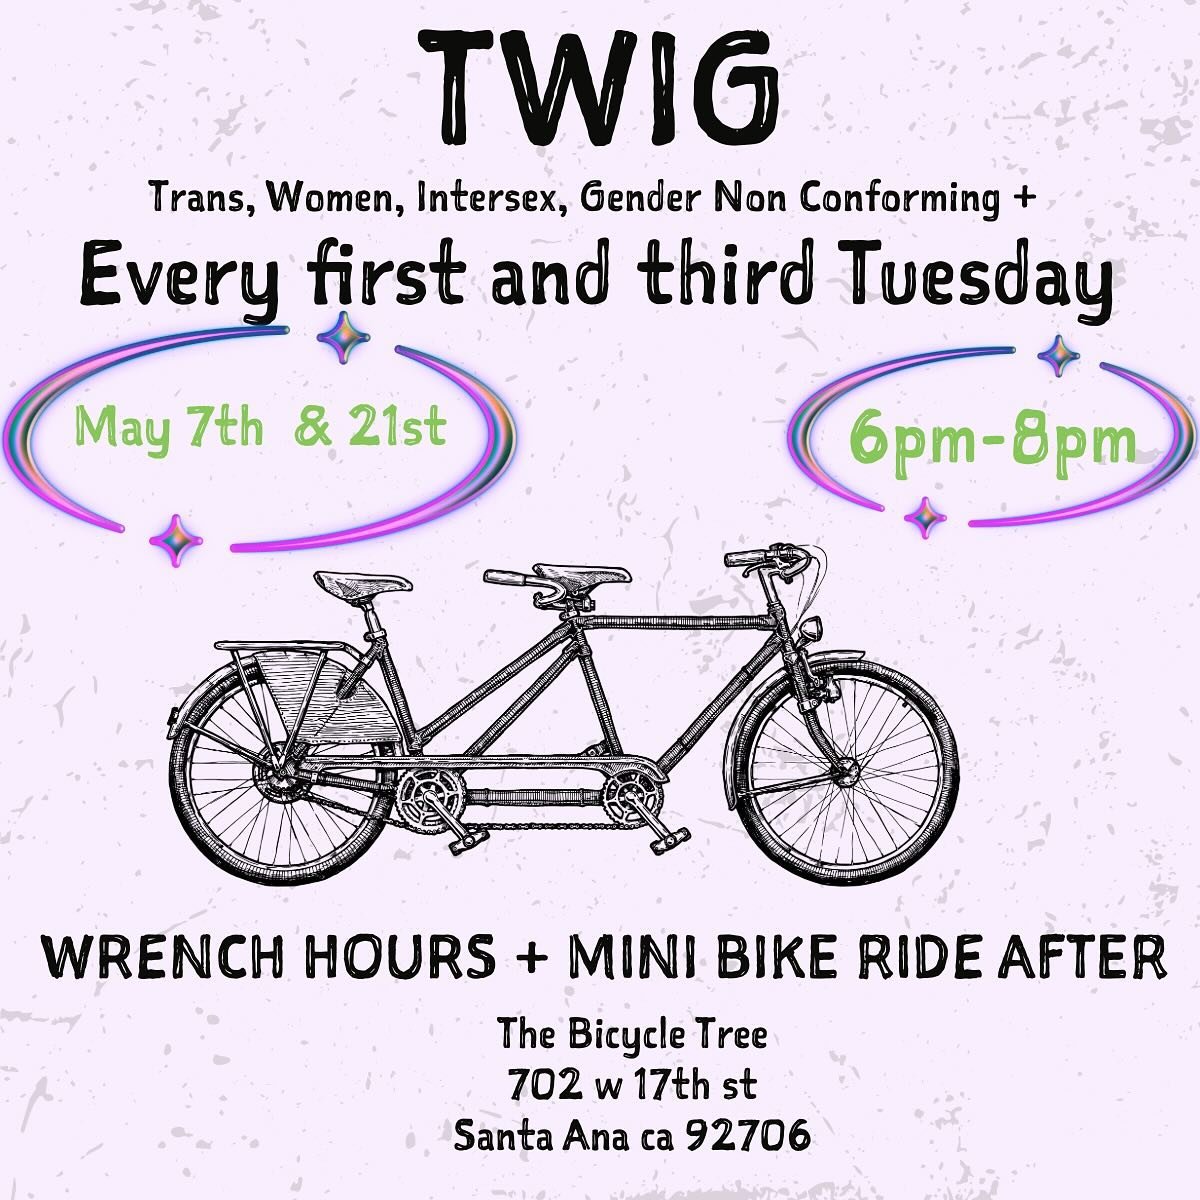 Come work on your bike every first and third Tuesday from 6pm-8pm @bicycletree! 

Wrench hours for Trans, Women, Intersex, Gender Non Conforming + folks 

come prep your bikes for Summer!

Optional bike ride after wrench hours from 8:30pm-10pm